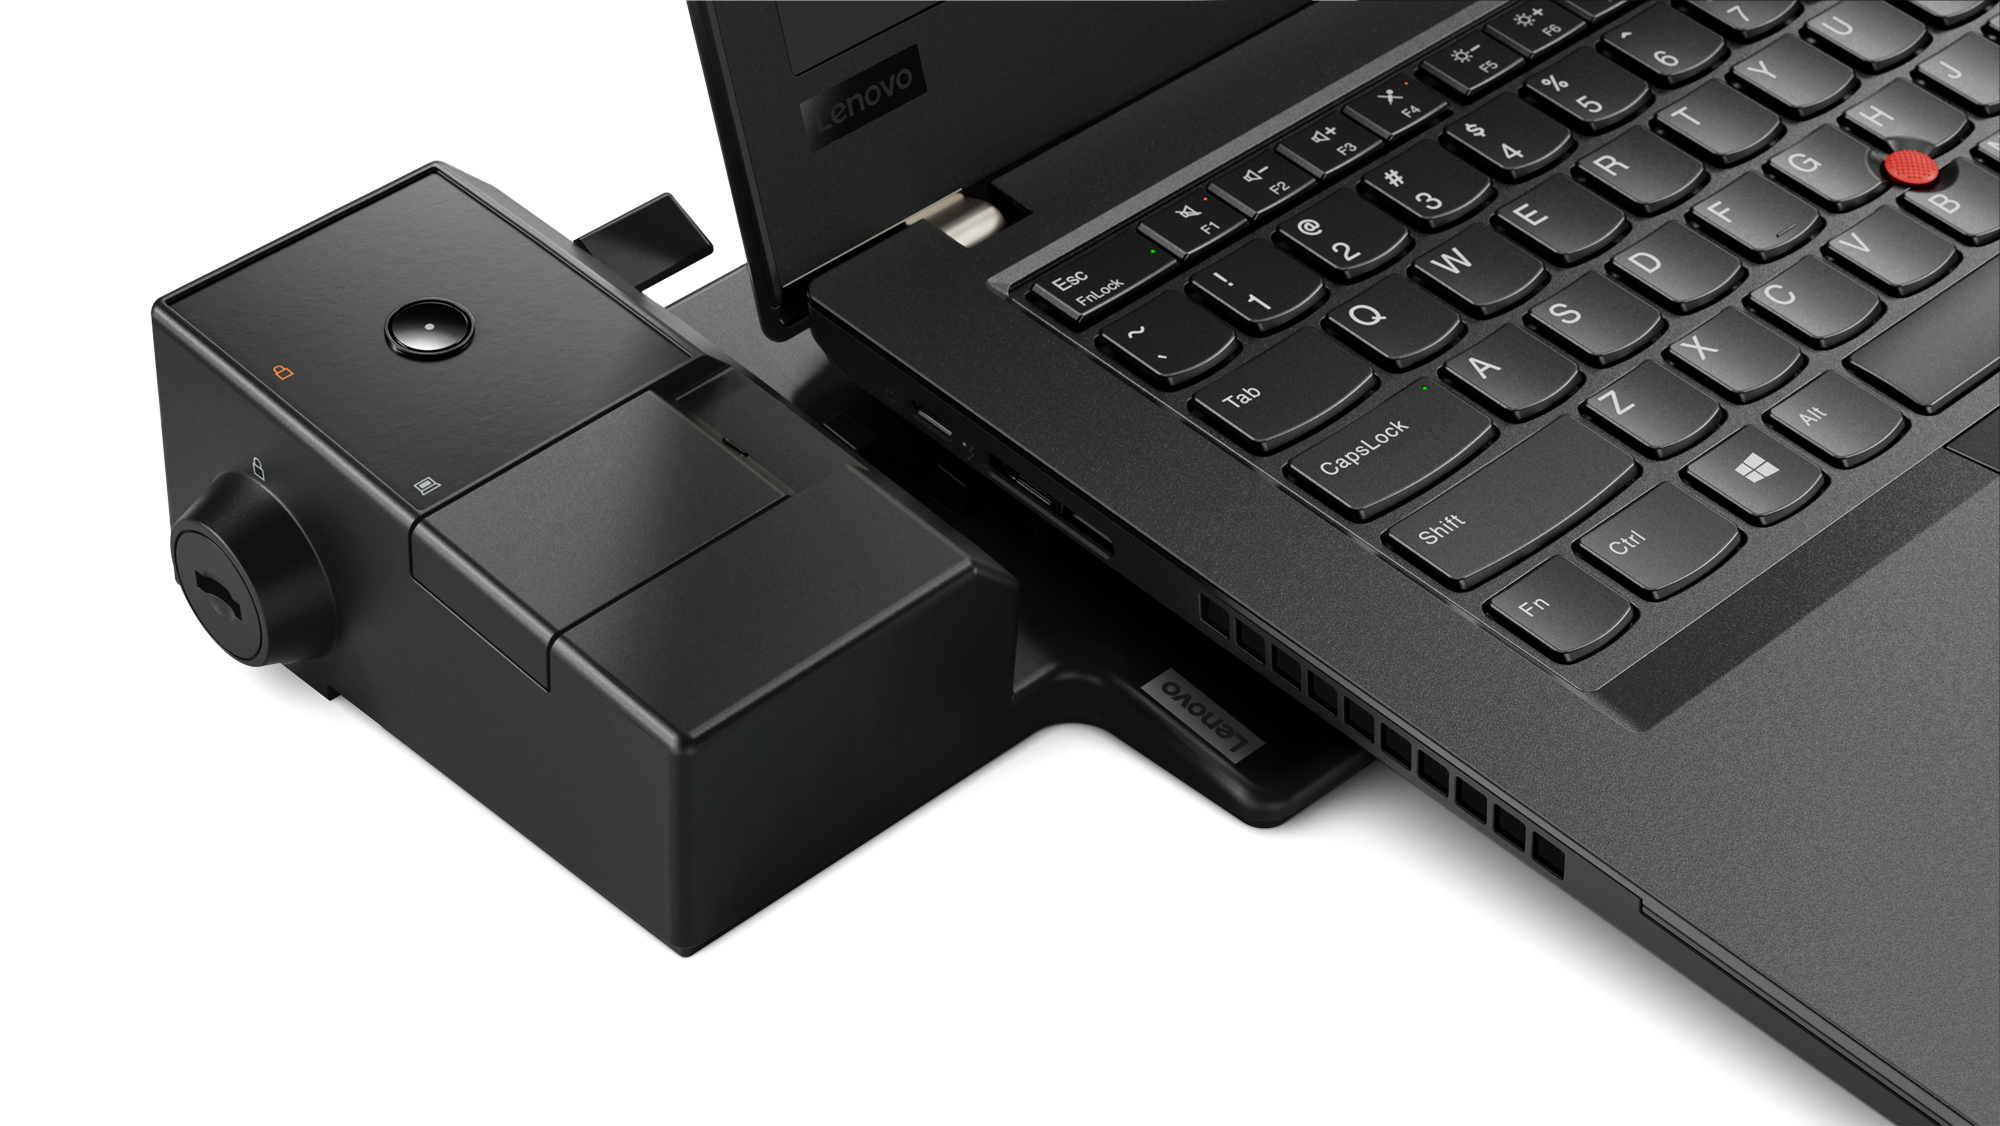 ThinkPad Ultra dock: New docking-stations for the ThinkPad T480